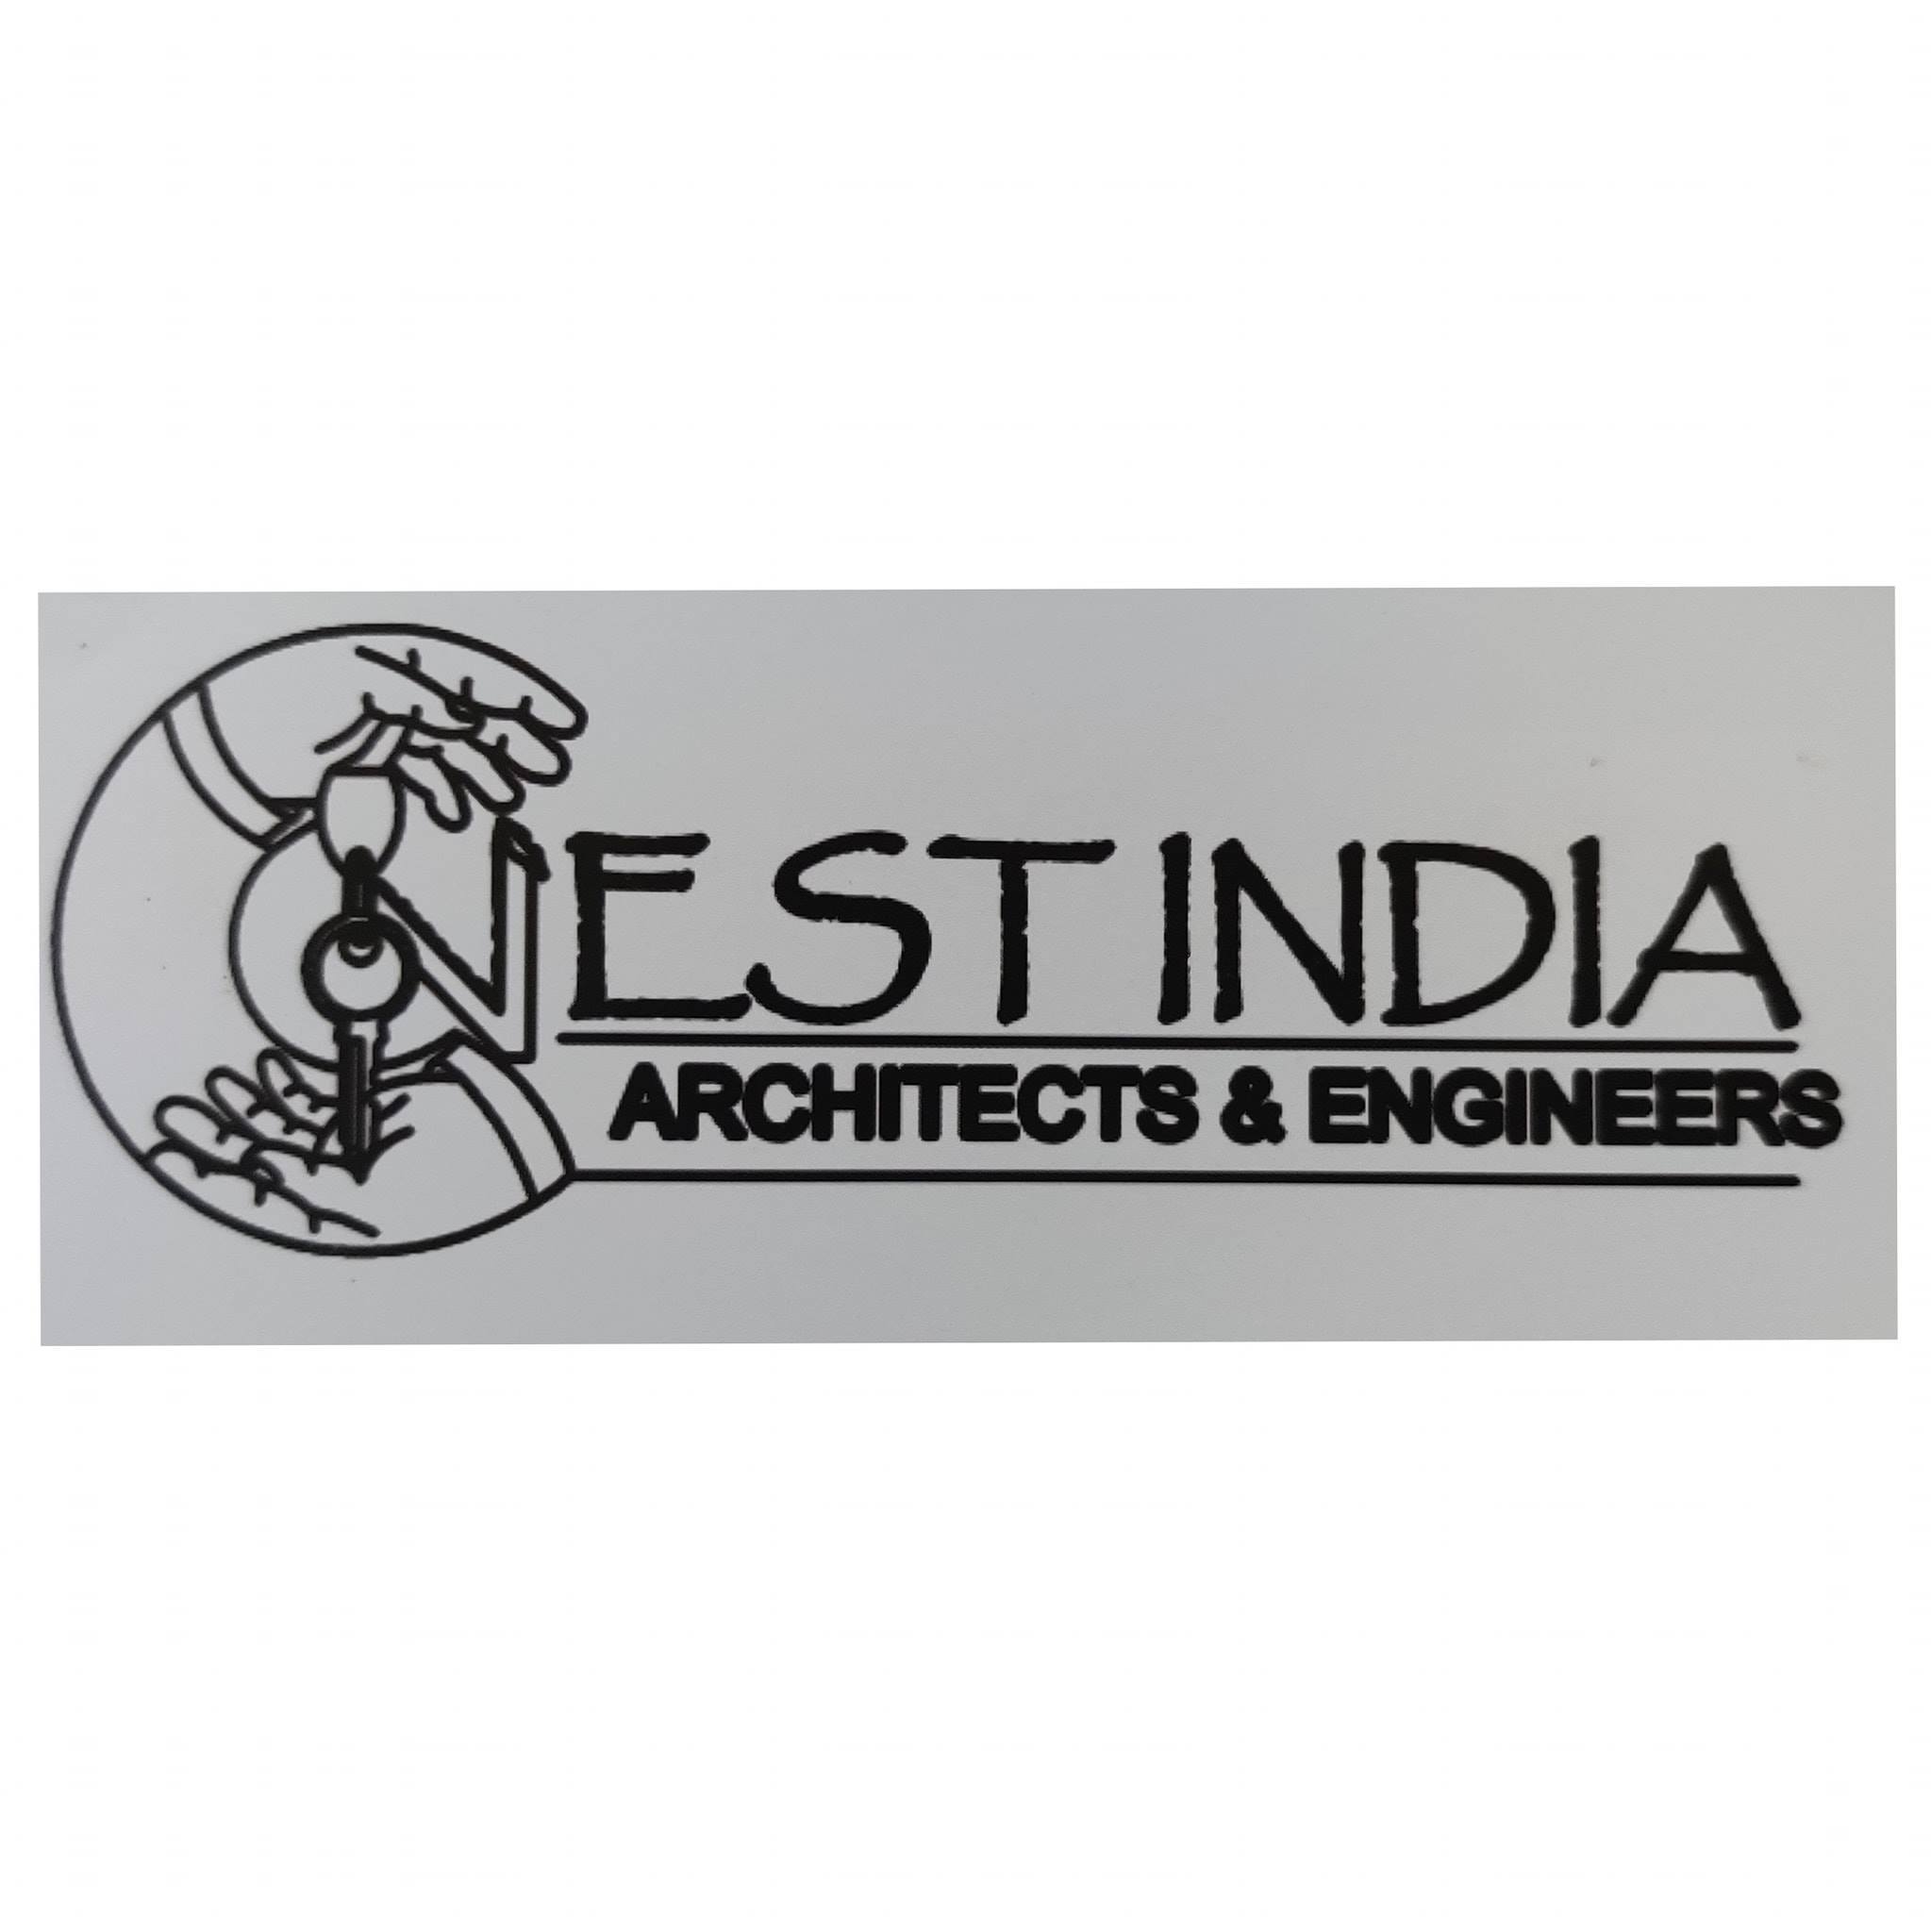 Nest India Architects and Engineers|IT Services|Professional Services